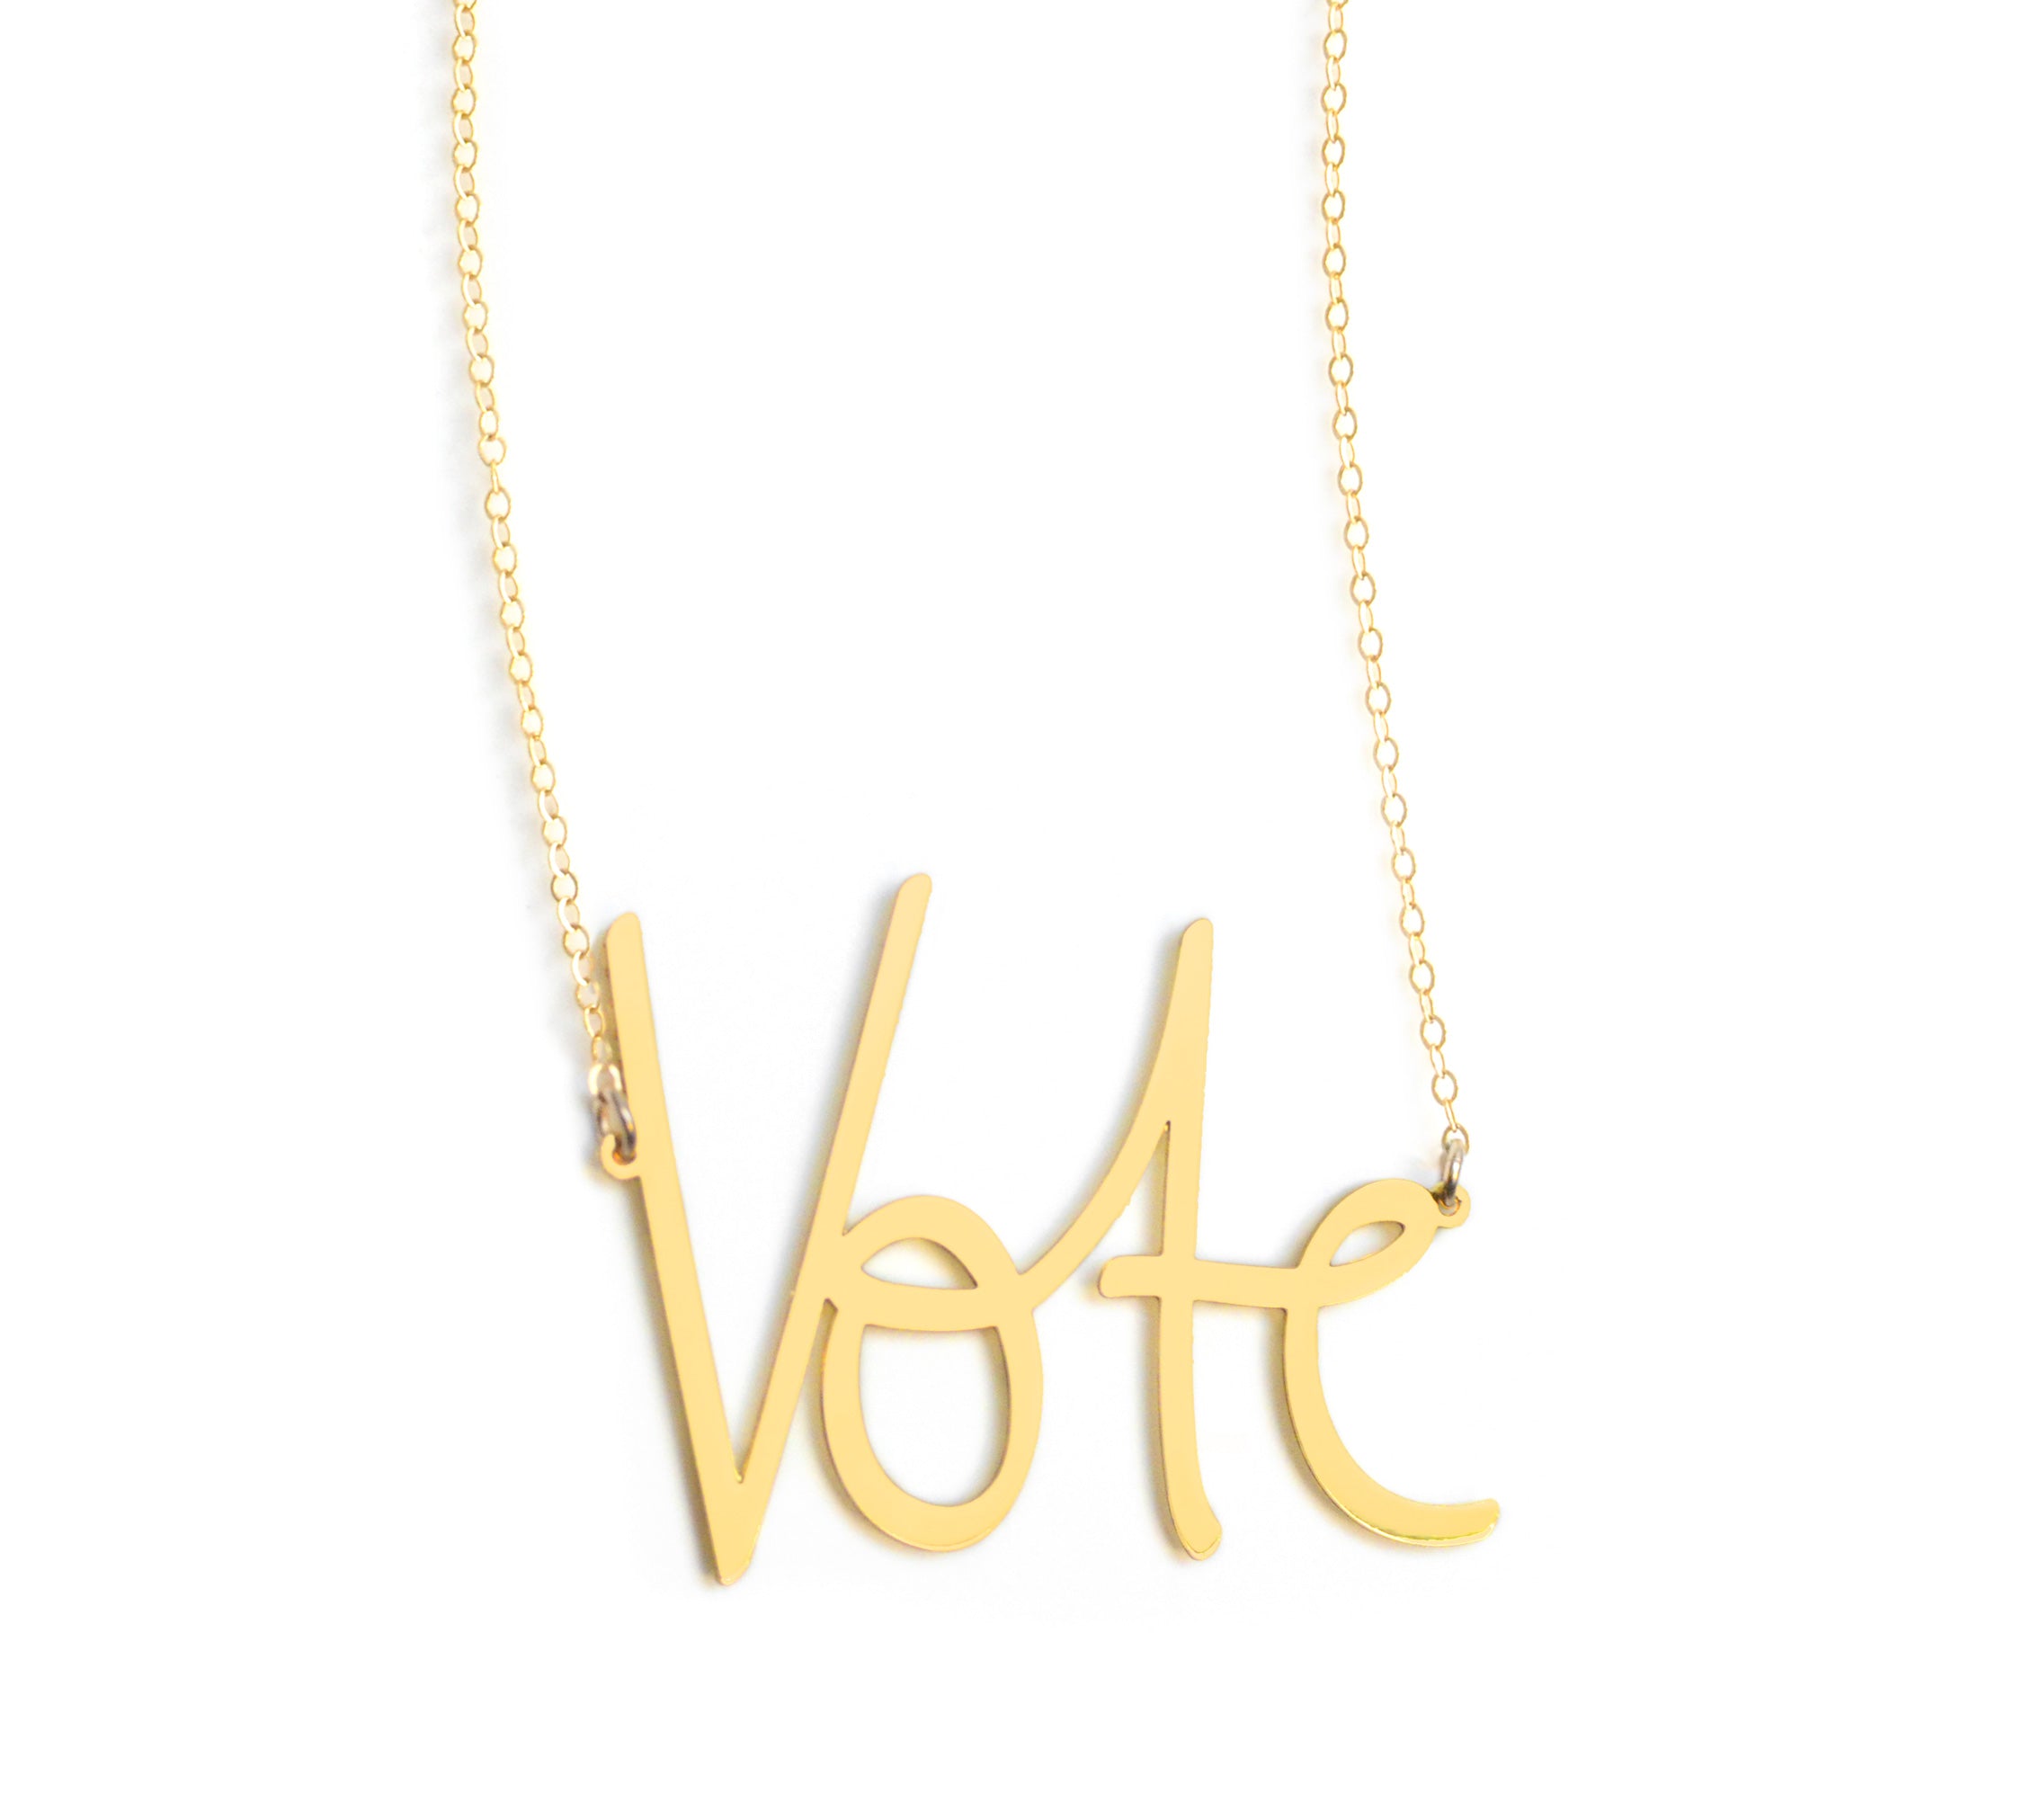 Vote Necklace - High Quality, Affordable, Hand Written, Empowering, Self Love, Mantra Word Necklace - Available in Gold and Silver - Small and Large Sizes - Made in USA - Brevity Jewelry